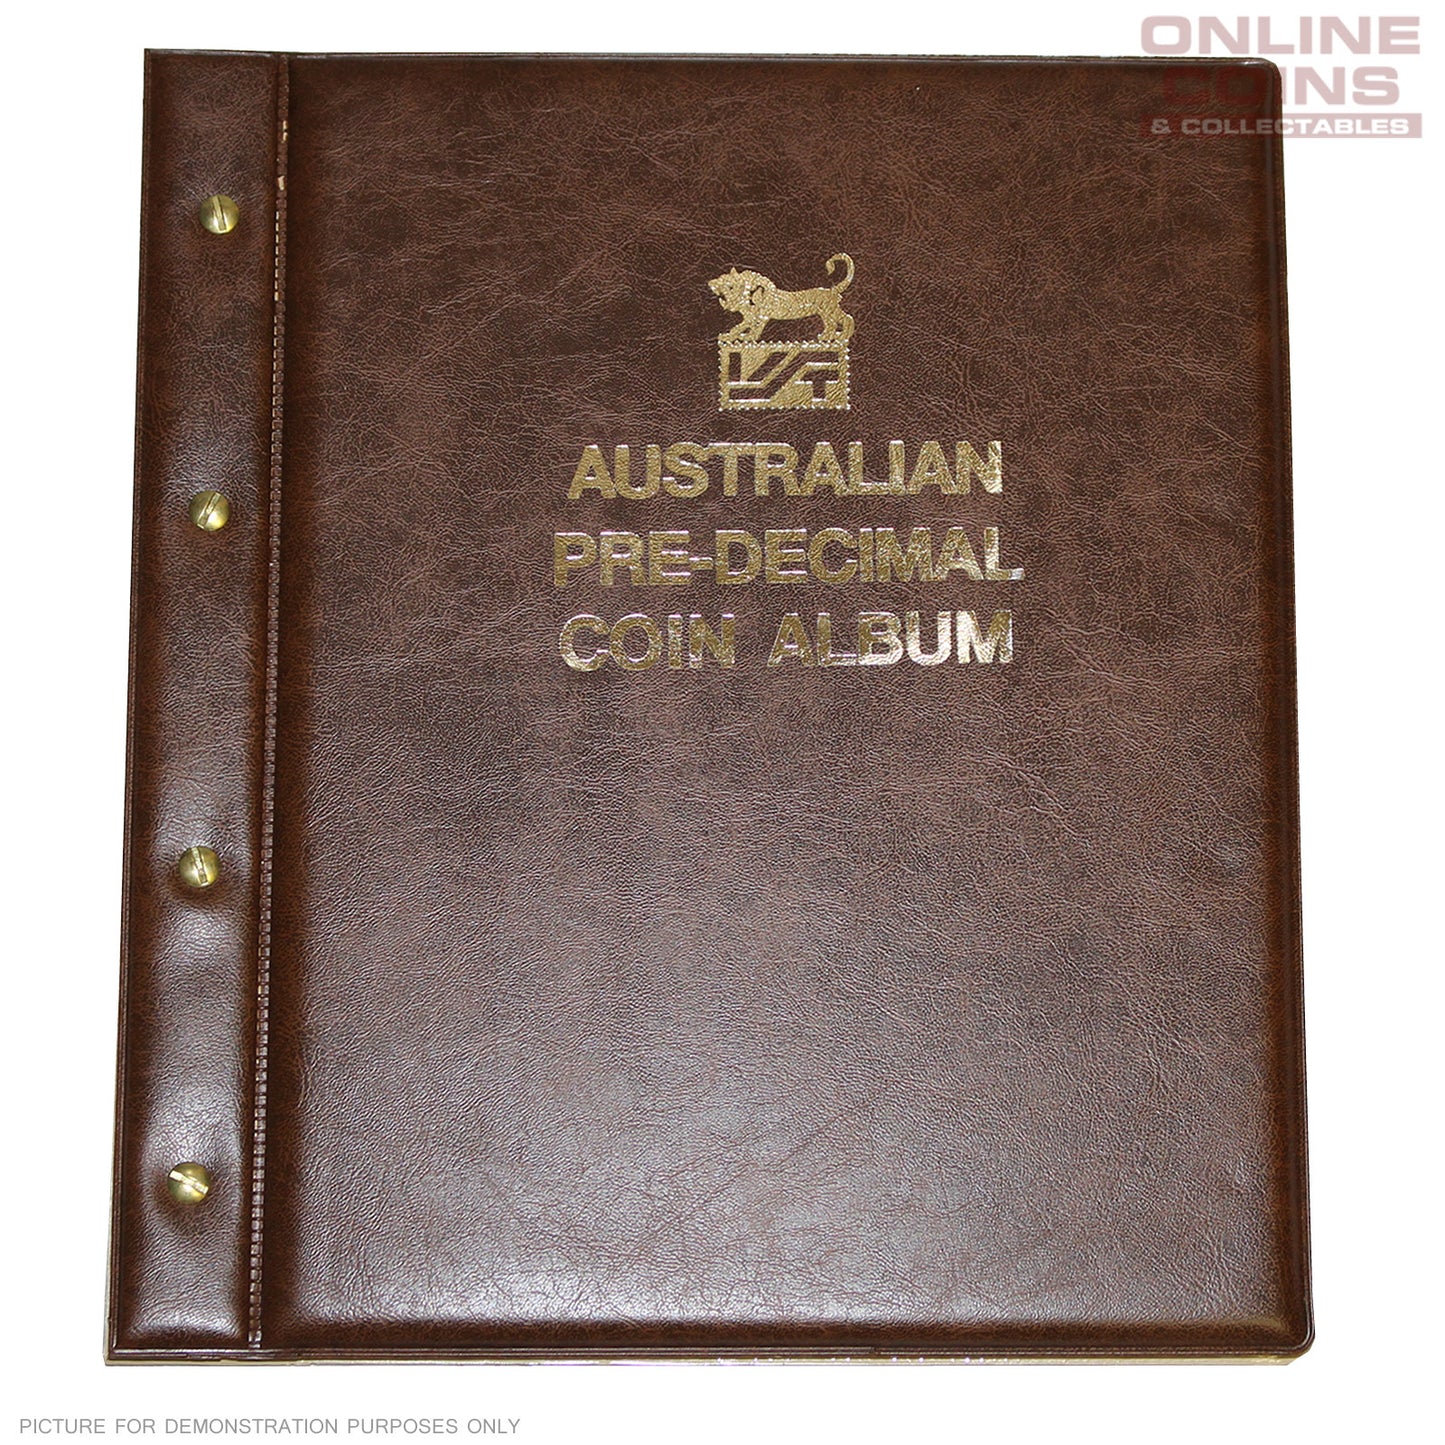 VST Coin Album Padded Leatherette Cover Australia Pre Decimal Pages - BROWN